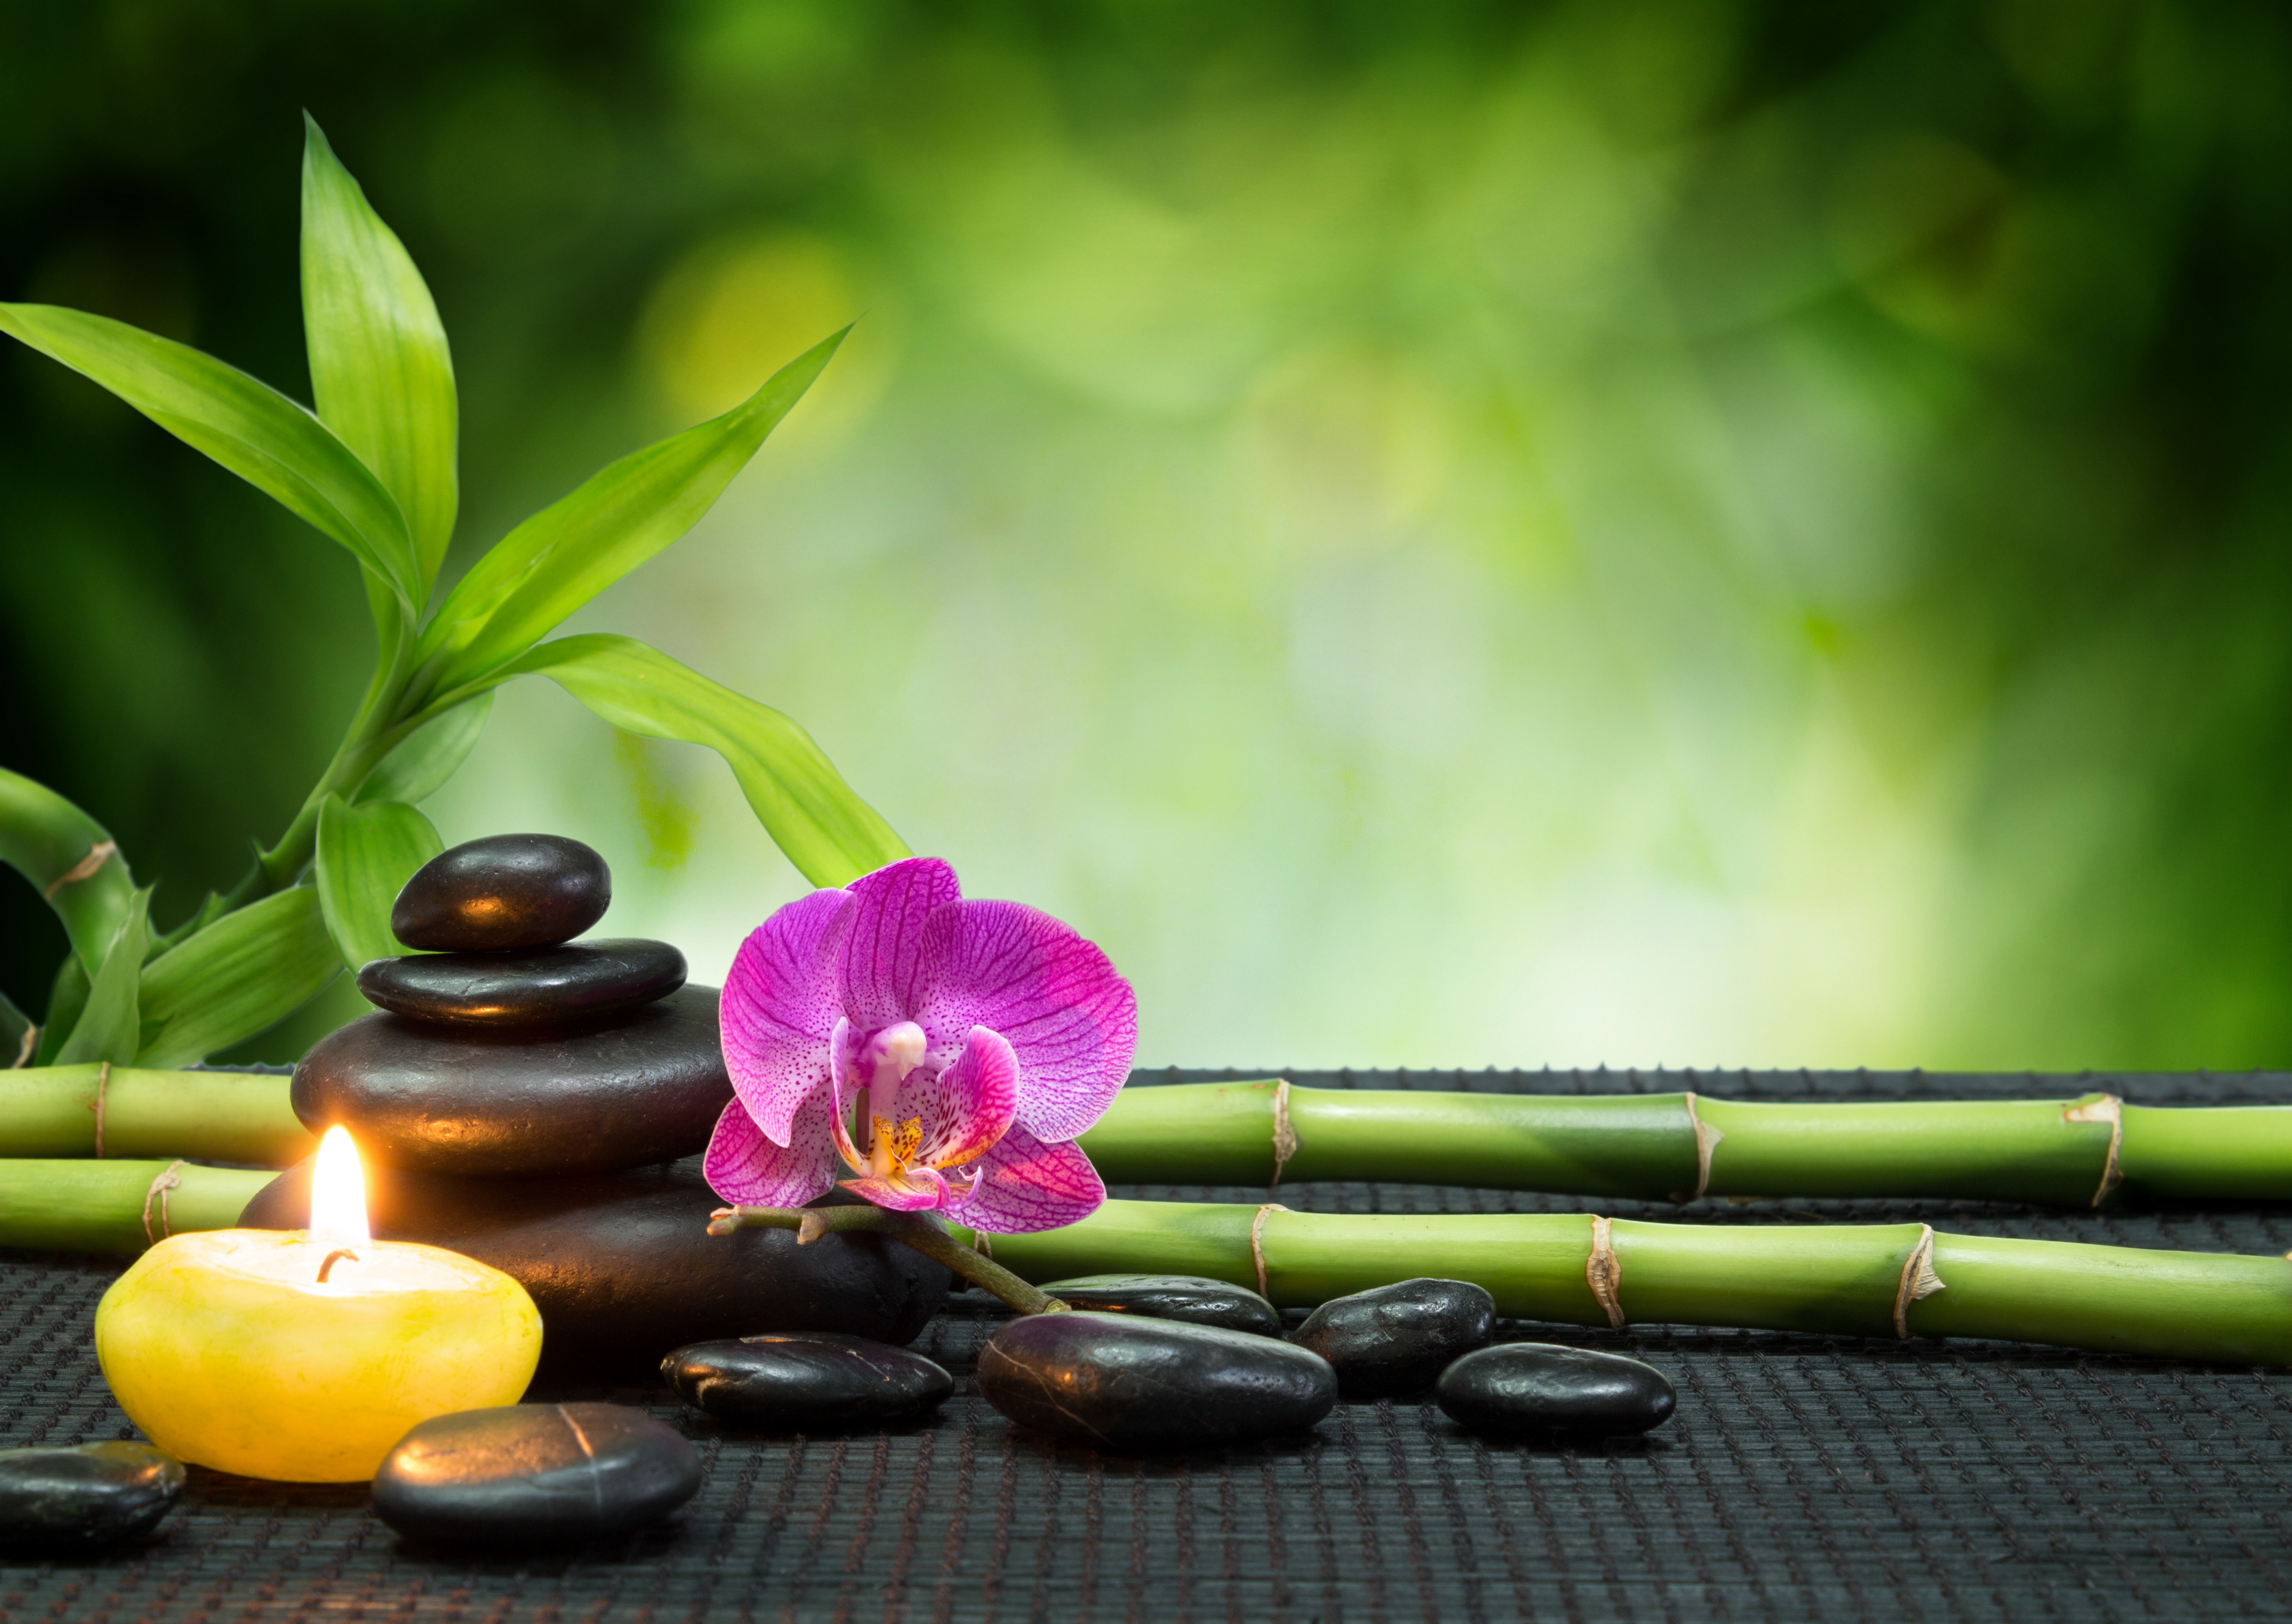 Candle Stones Orchid Bamboo Spa Zen Hd 340338 Hd Wallpaper And Backgrounds Download